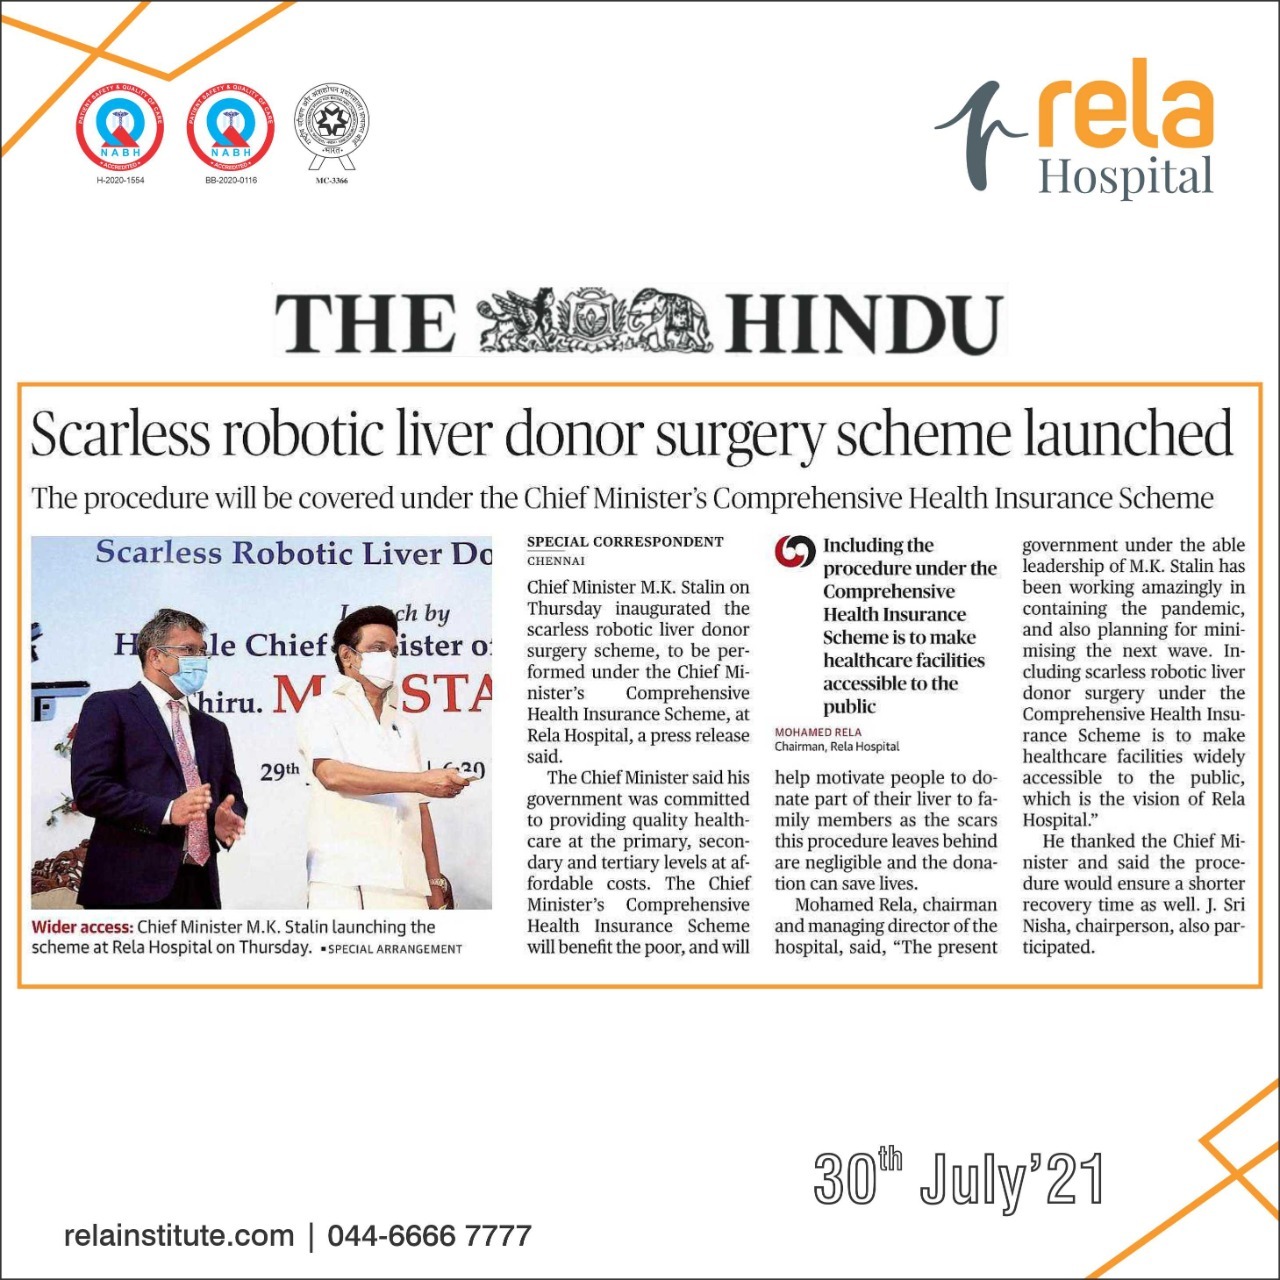 Launch Of Scarless Robotic Liver Donor Surgery Under The Chief Minister’s Health Insurance Scheme